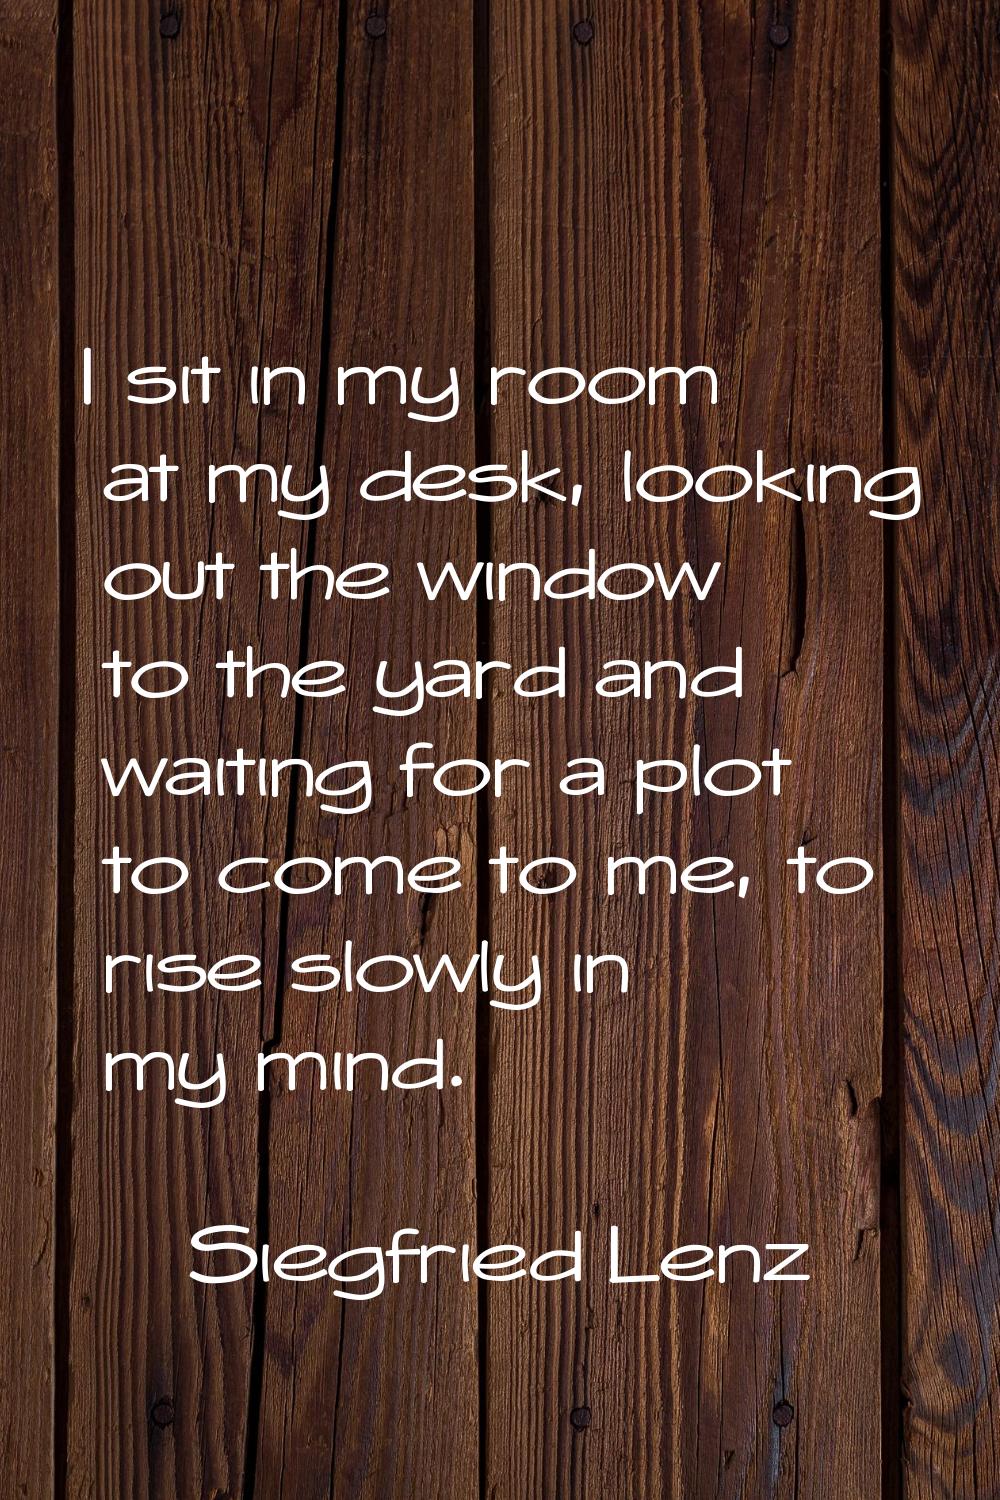 I sit in my room at my desk, looking out the window to the yard and waiting for a plot to come to m